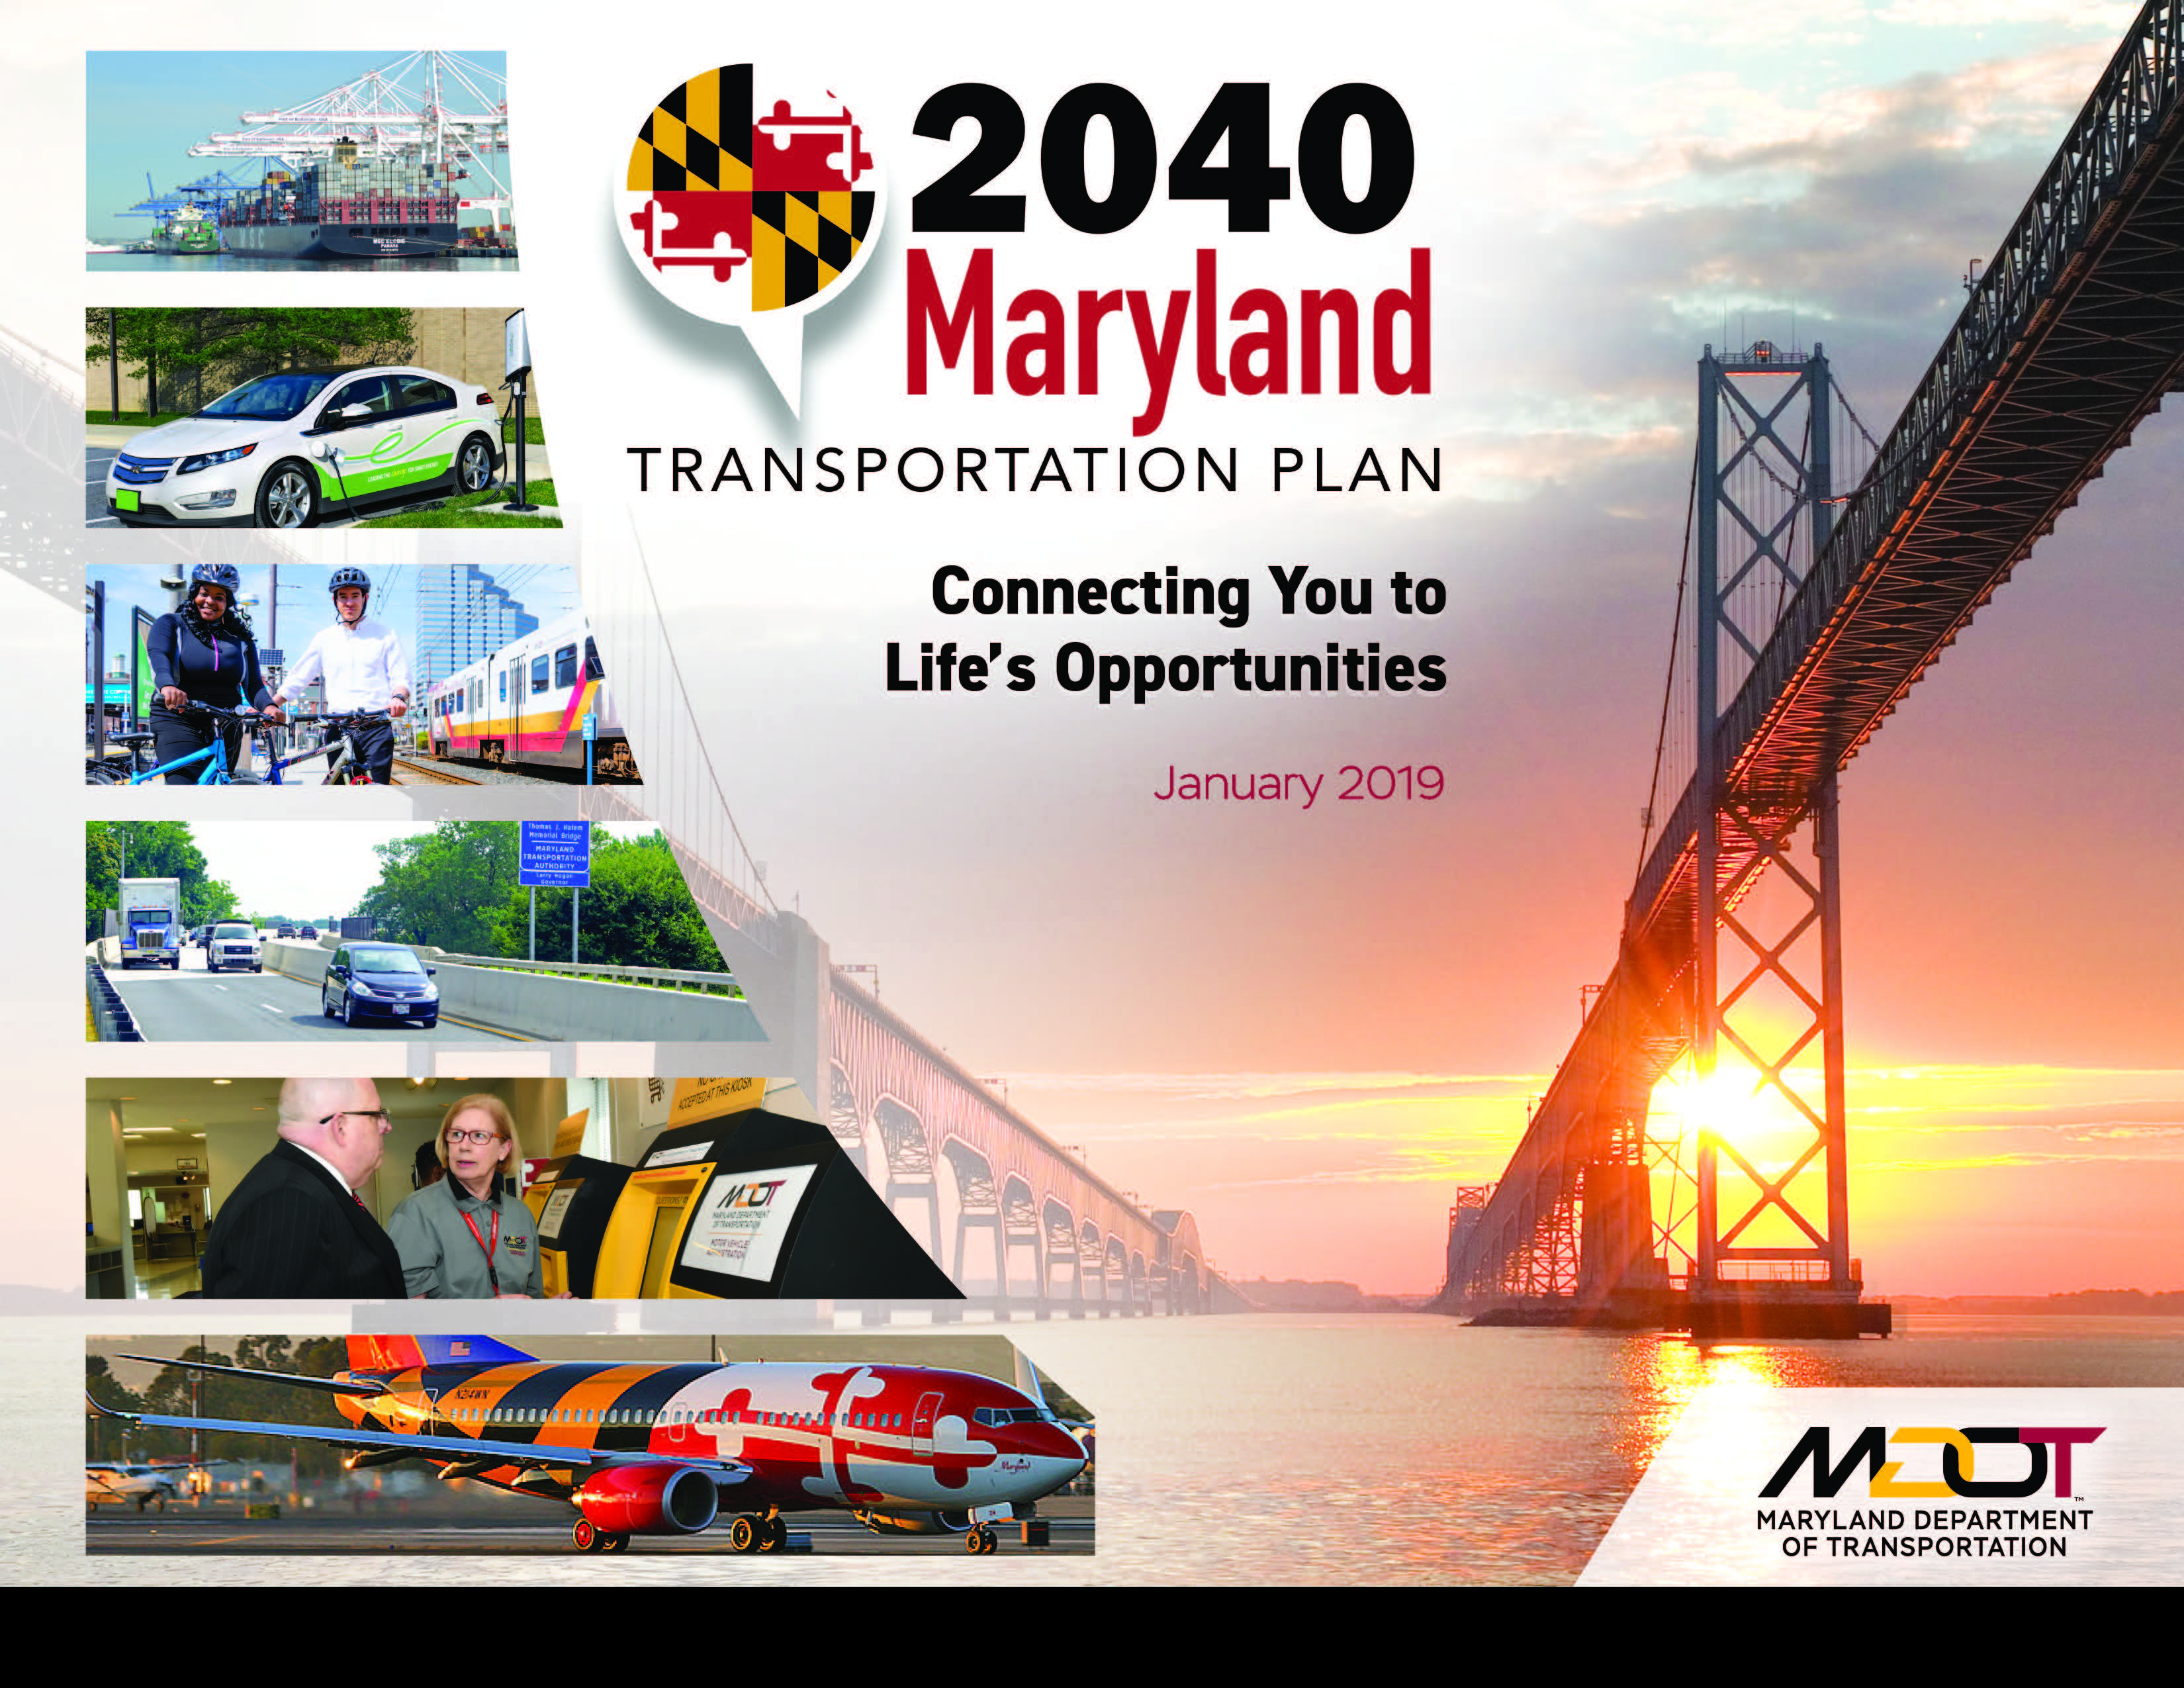 The cover of the 2040 Maryland Transportation Plan